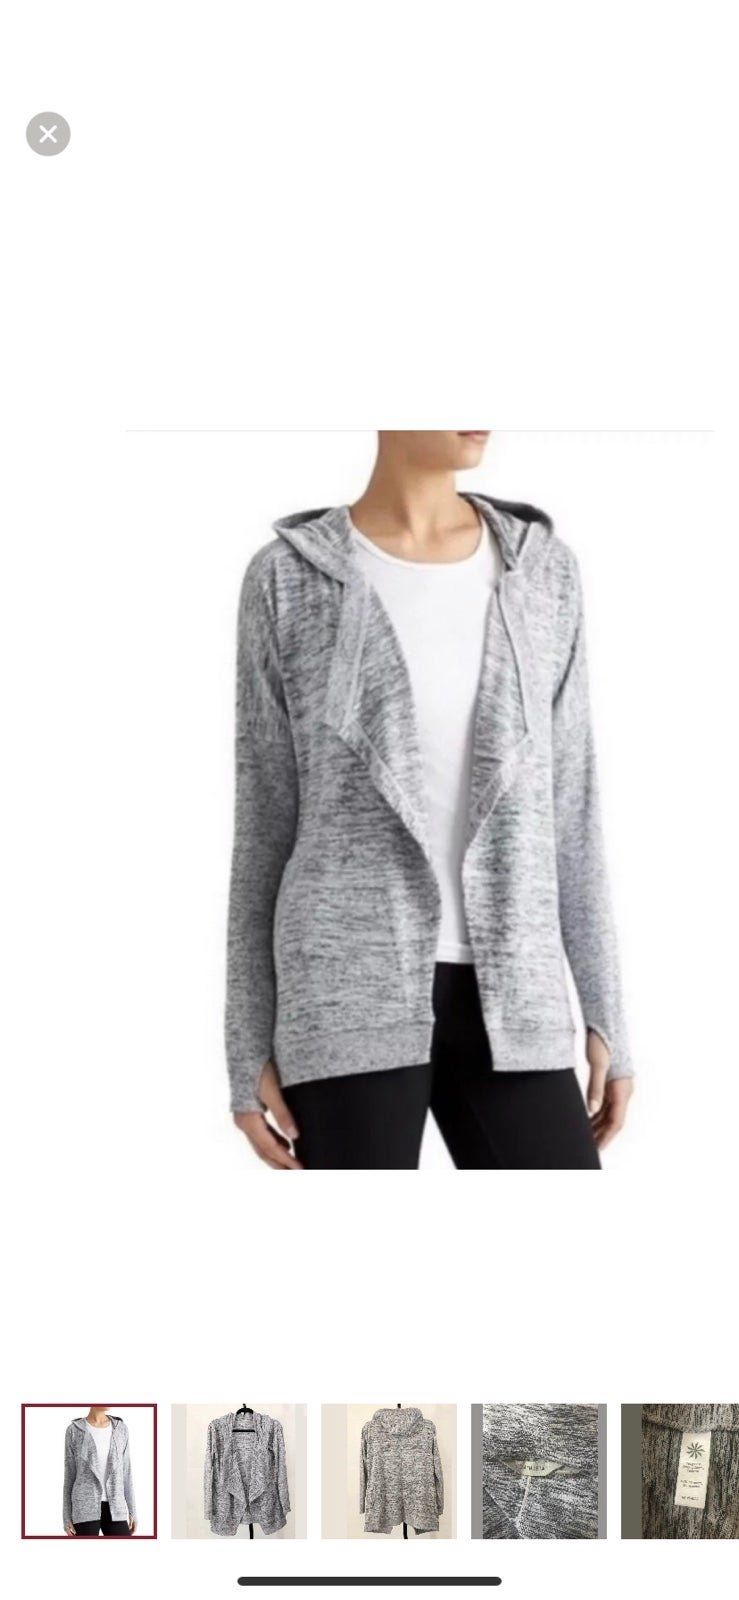 cheapest place to buy  NWOT Athleta Blissful Gray Open Front Hooded Cardigan Sweater Size Medium IAPslnmUx for sale